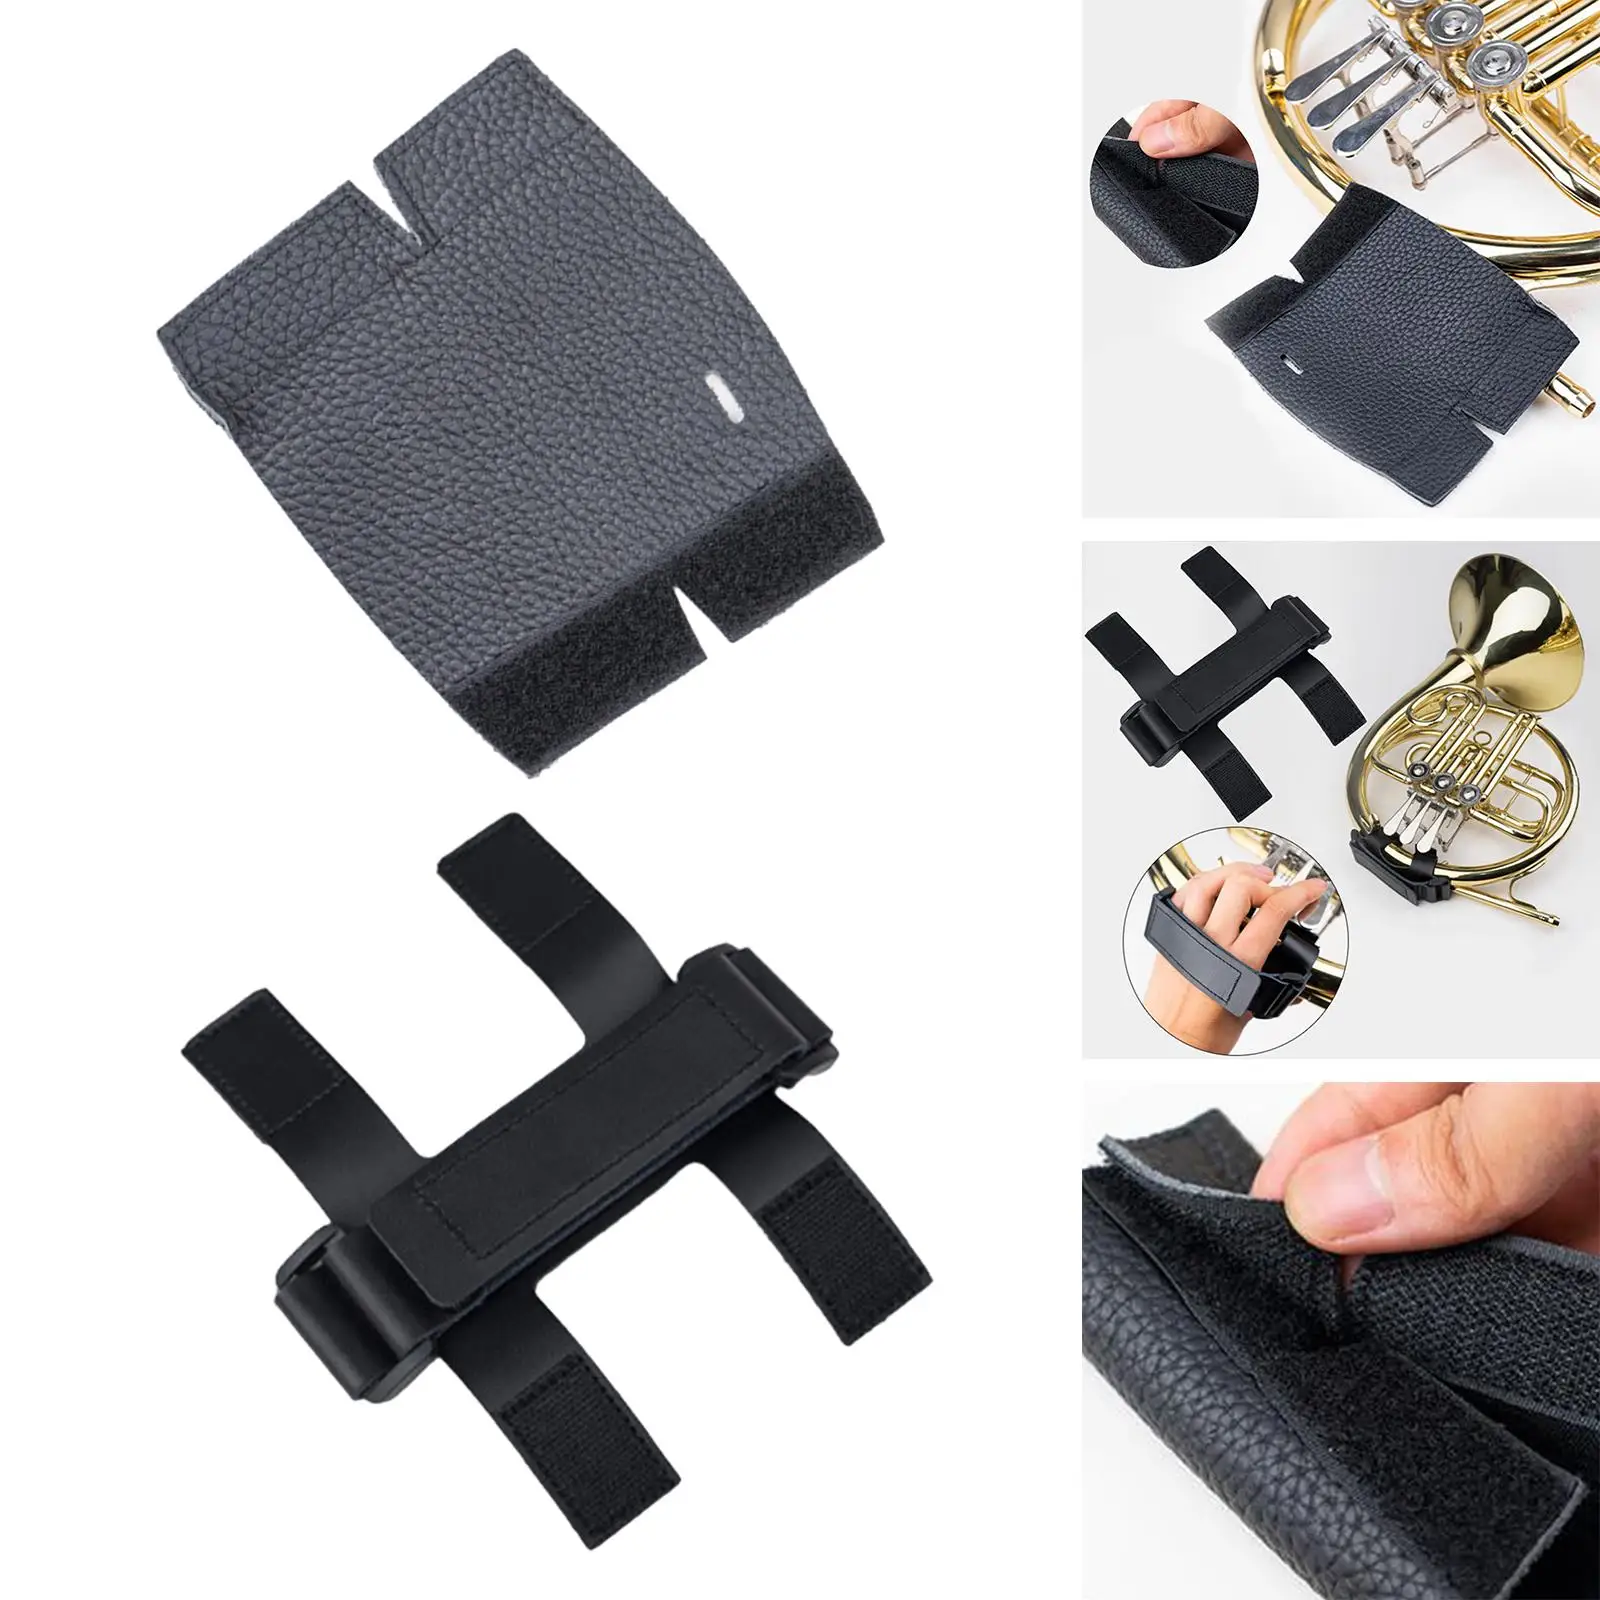 French Horn Hand Guard Adjustable Wear Resistant PU Leather Wrap Cover Wrap Cover for Tour Practice Performance Stage Exercise